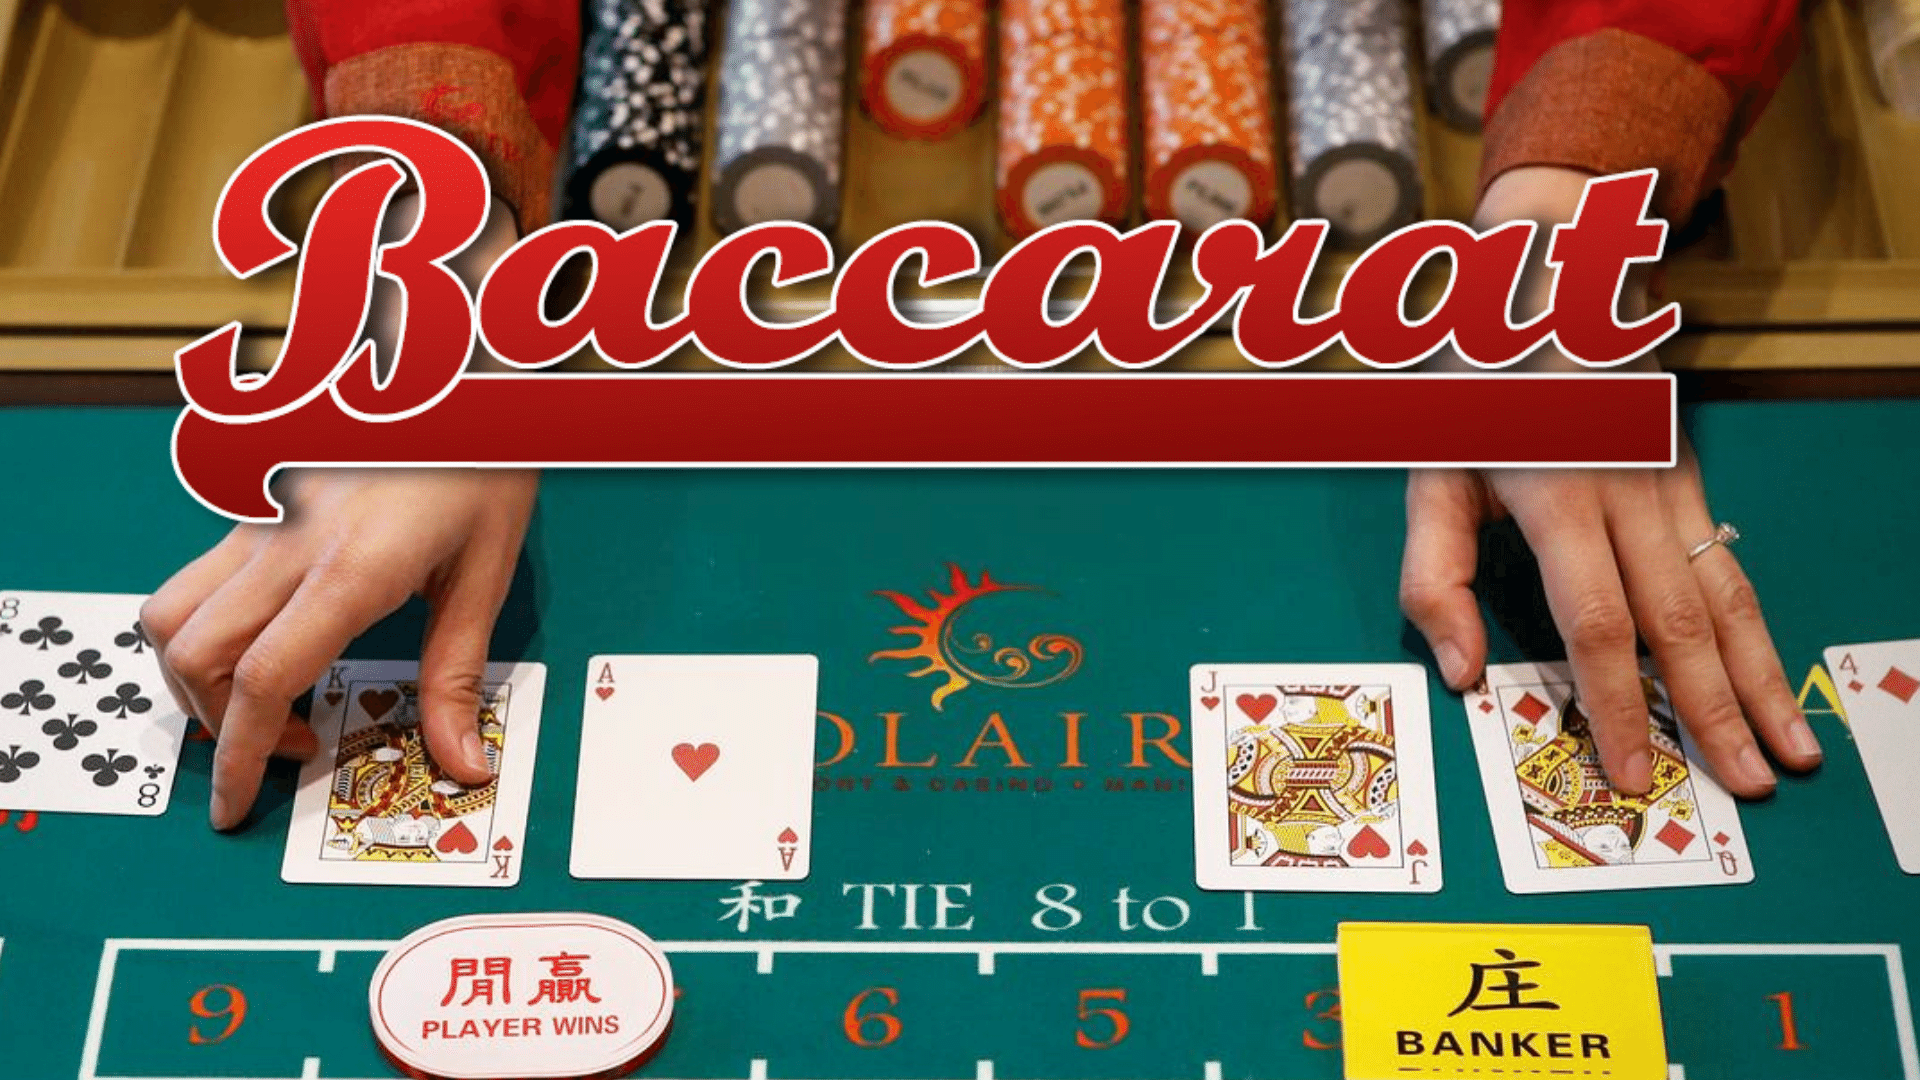 Baccarat Strategy